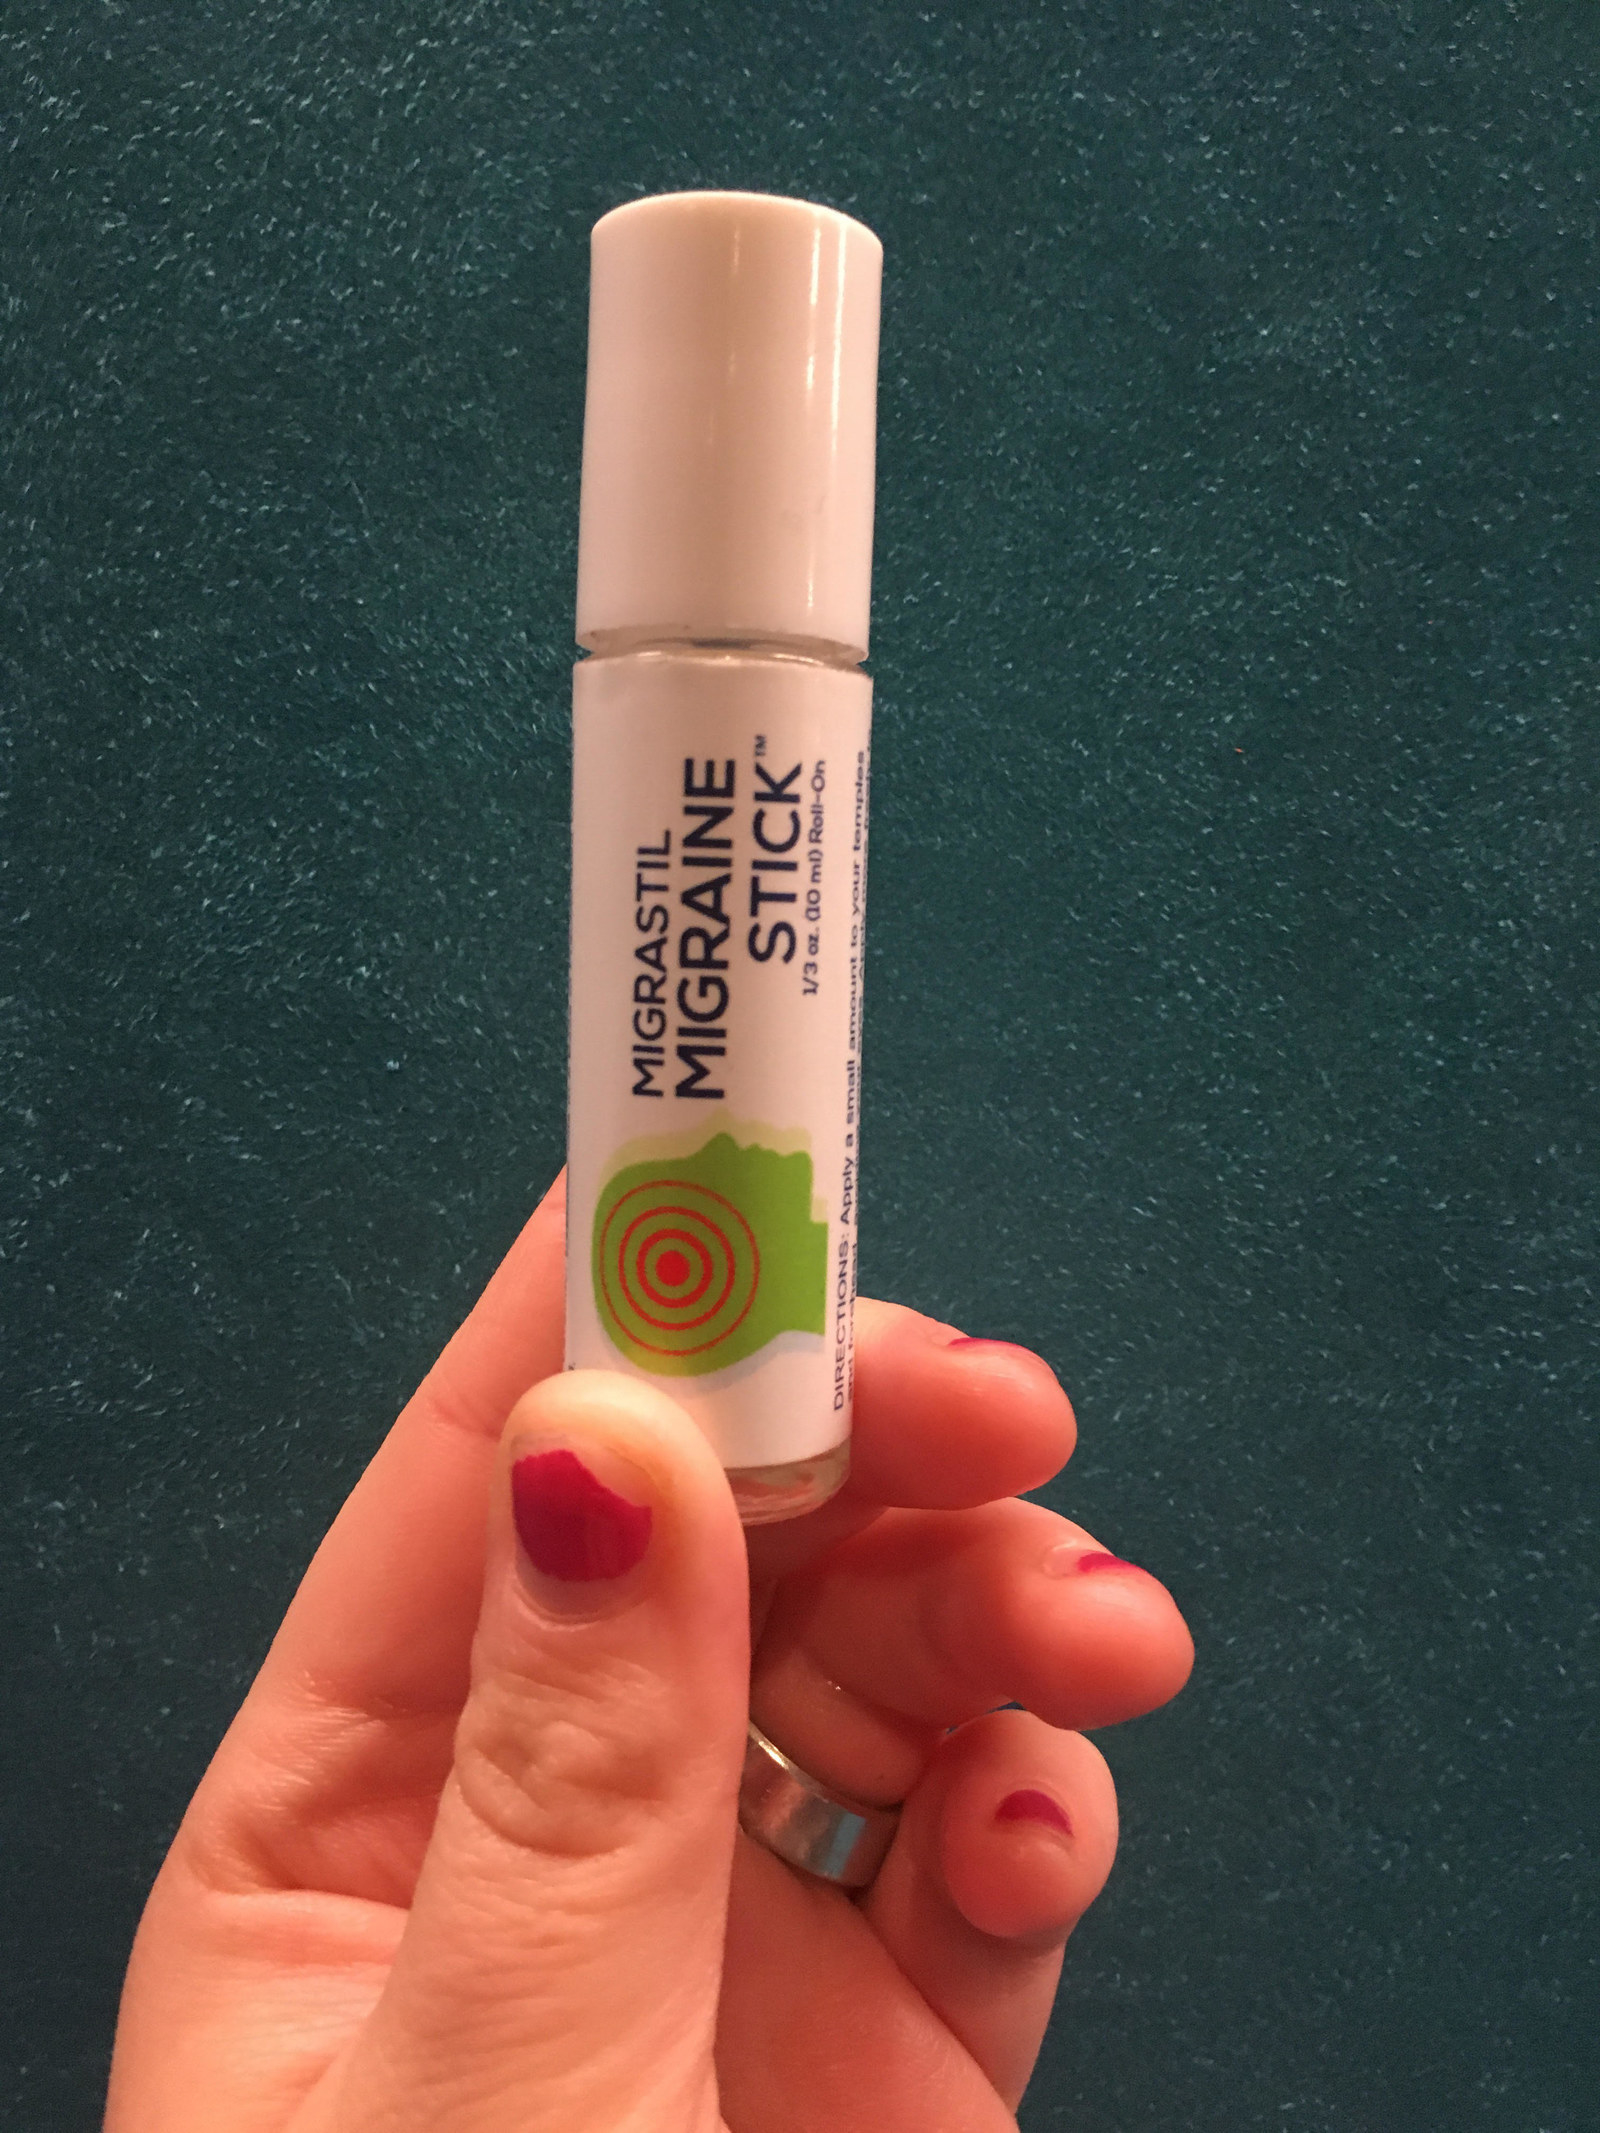 Review photo of the headache stick taken by BuzzFeed editor Katy Herman showing that it&#x27;s roughly the size of a lip balm